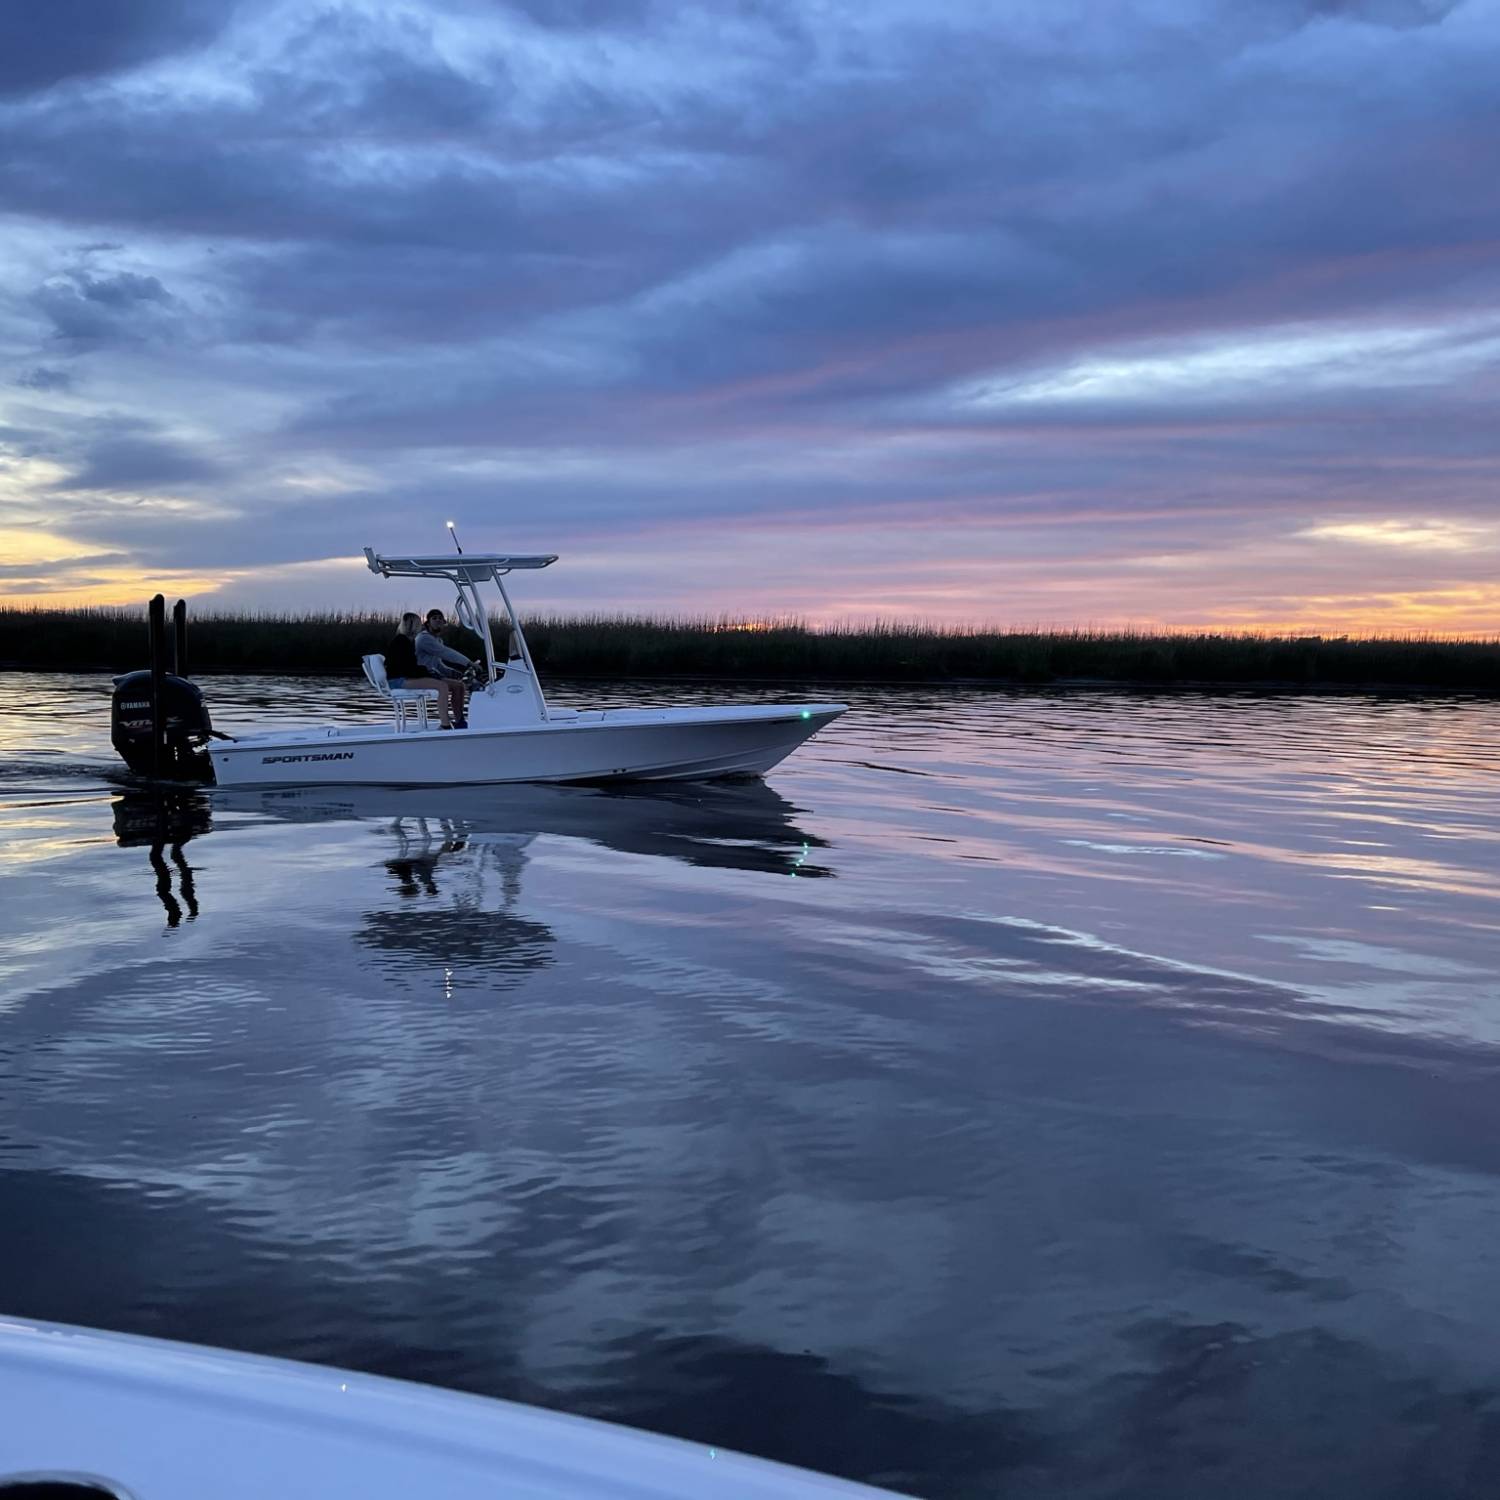 Title: First Evening Ride - On board their Sportsman Tournament 214 Bay Boat - Location: Black River Georgetown SC. Participating in the Photo Contest #SportsmanMay